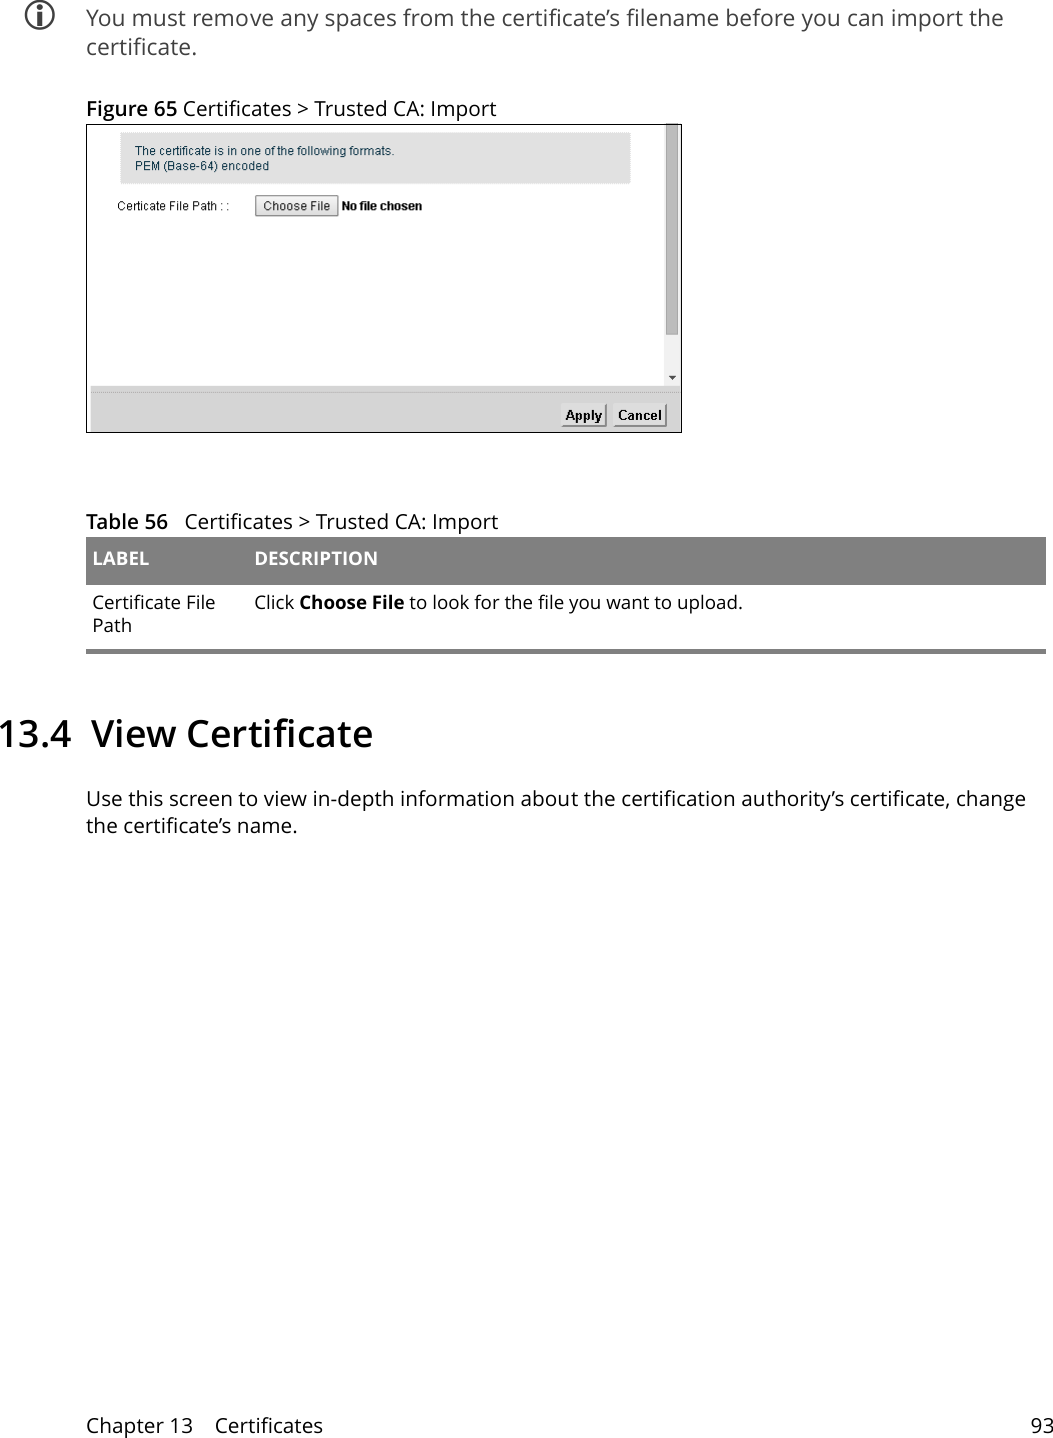 Chapter 13    Certificates 93 You must remove any spaces from the certificate’s filename before you can import the certificate.Figure 65 Certificates &gt; Trusted CA: ImportTable 56   Certificates &gt; Trusted CA: Import LABEL DESCRIPTIONCertificate File Path Click Choose File to look for the file you want to upload.13.4  View Certificate Use this screen to view in-depth information about the certification authority’s certificate, change the certificate’s name.